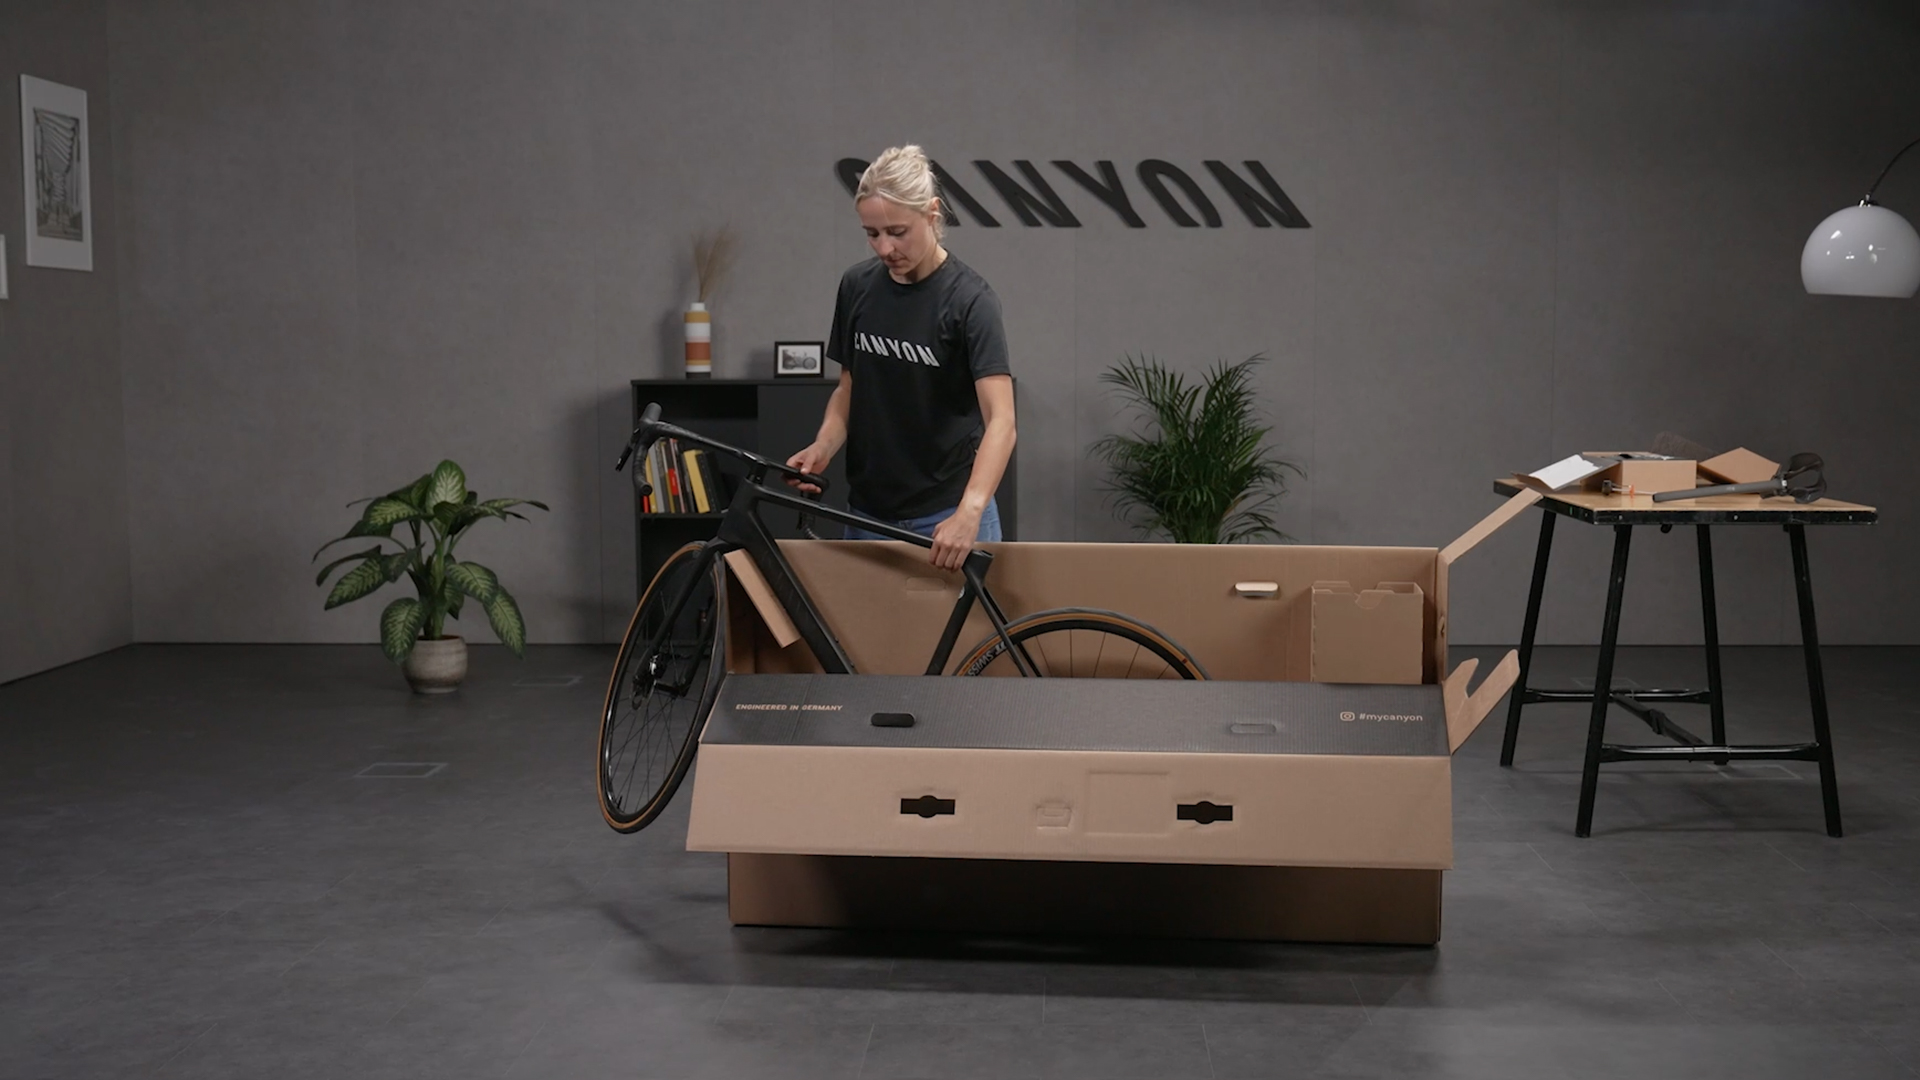 Unbox and assemble your Ultimate CF SLX